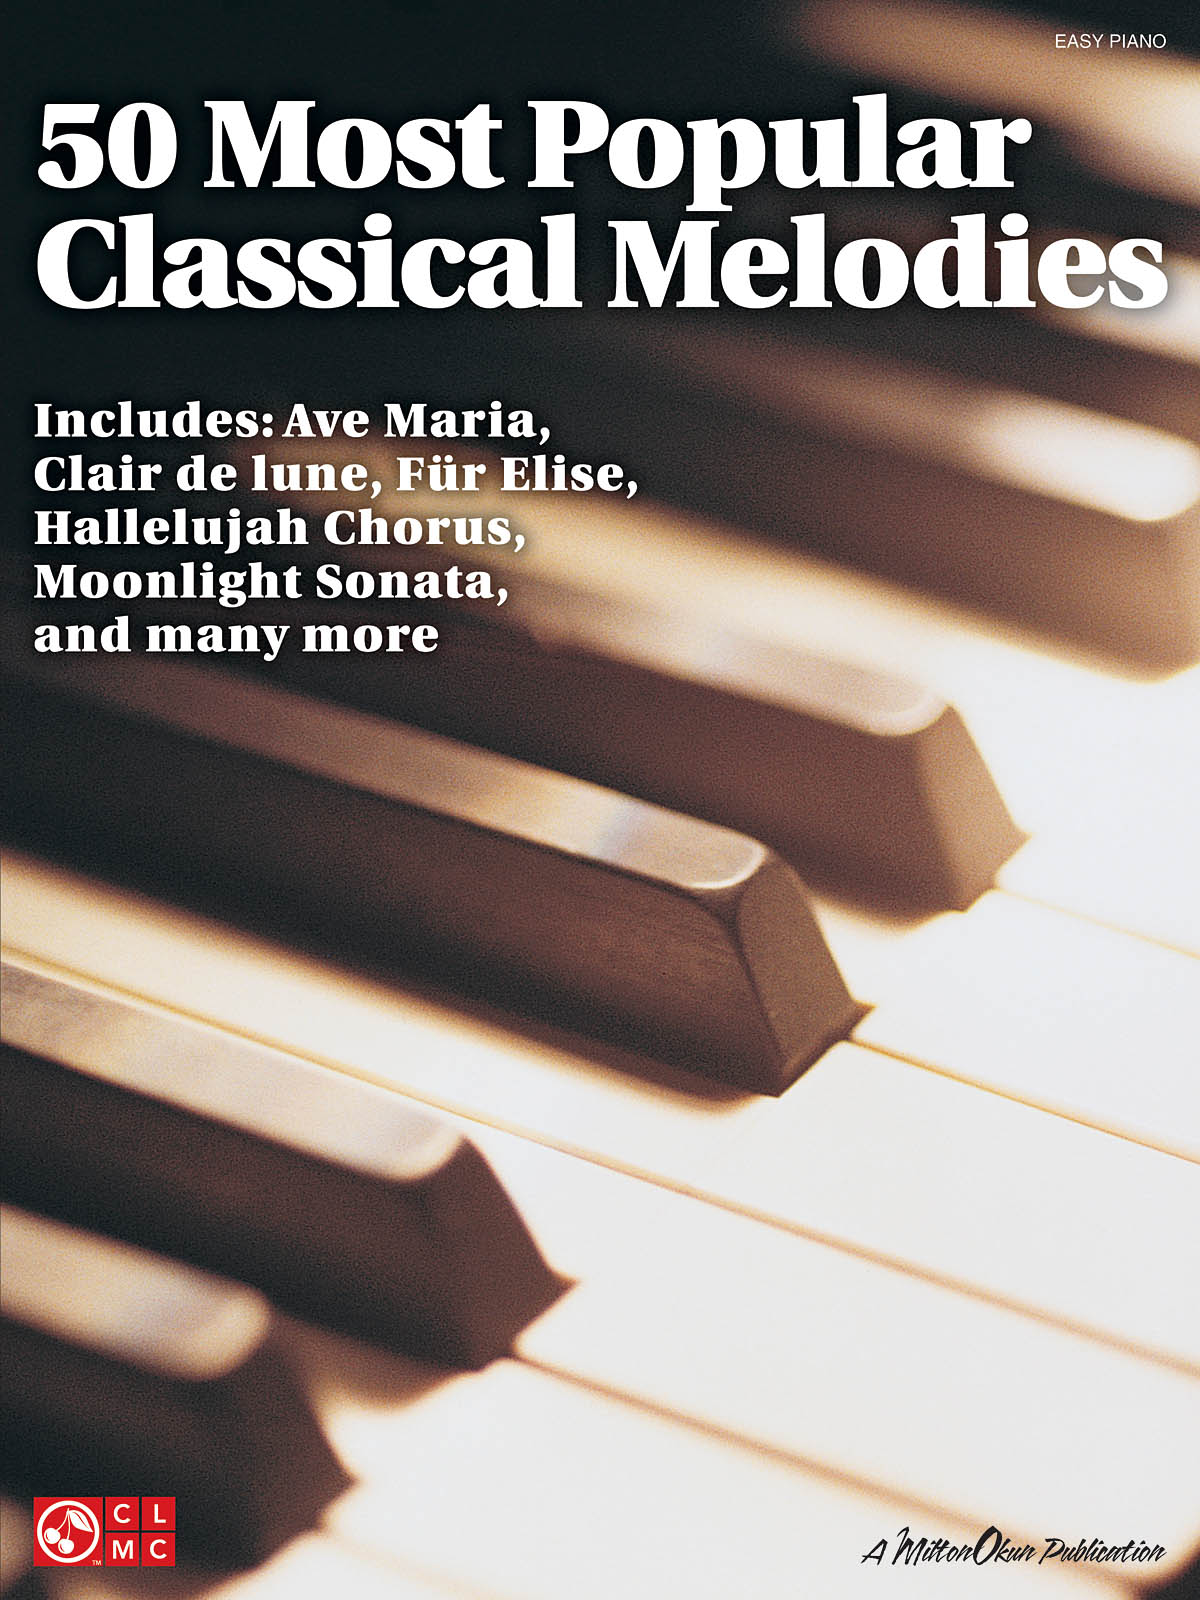 50 Most Popular Classical Melodies: Easy Piano: Instrumental Album